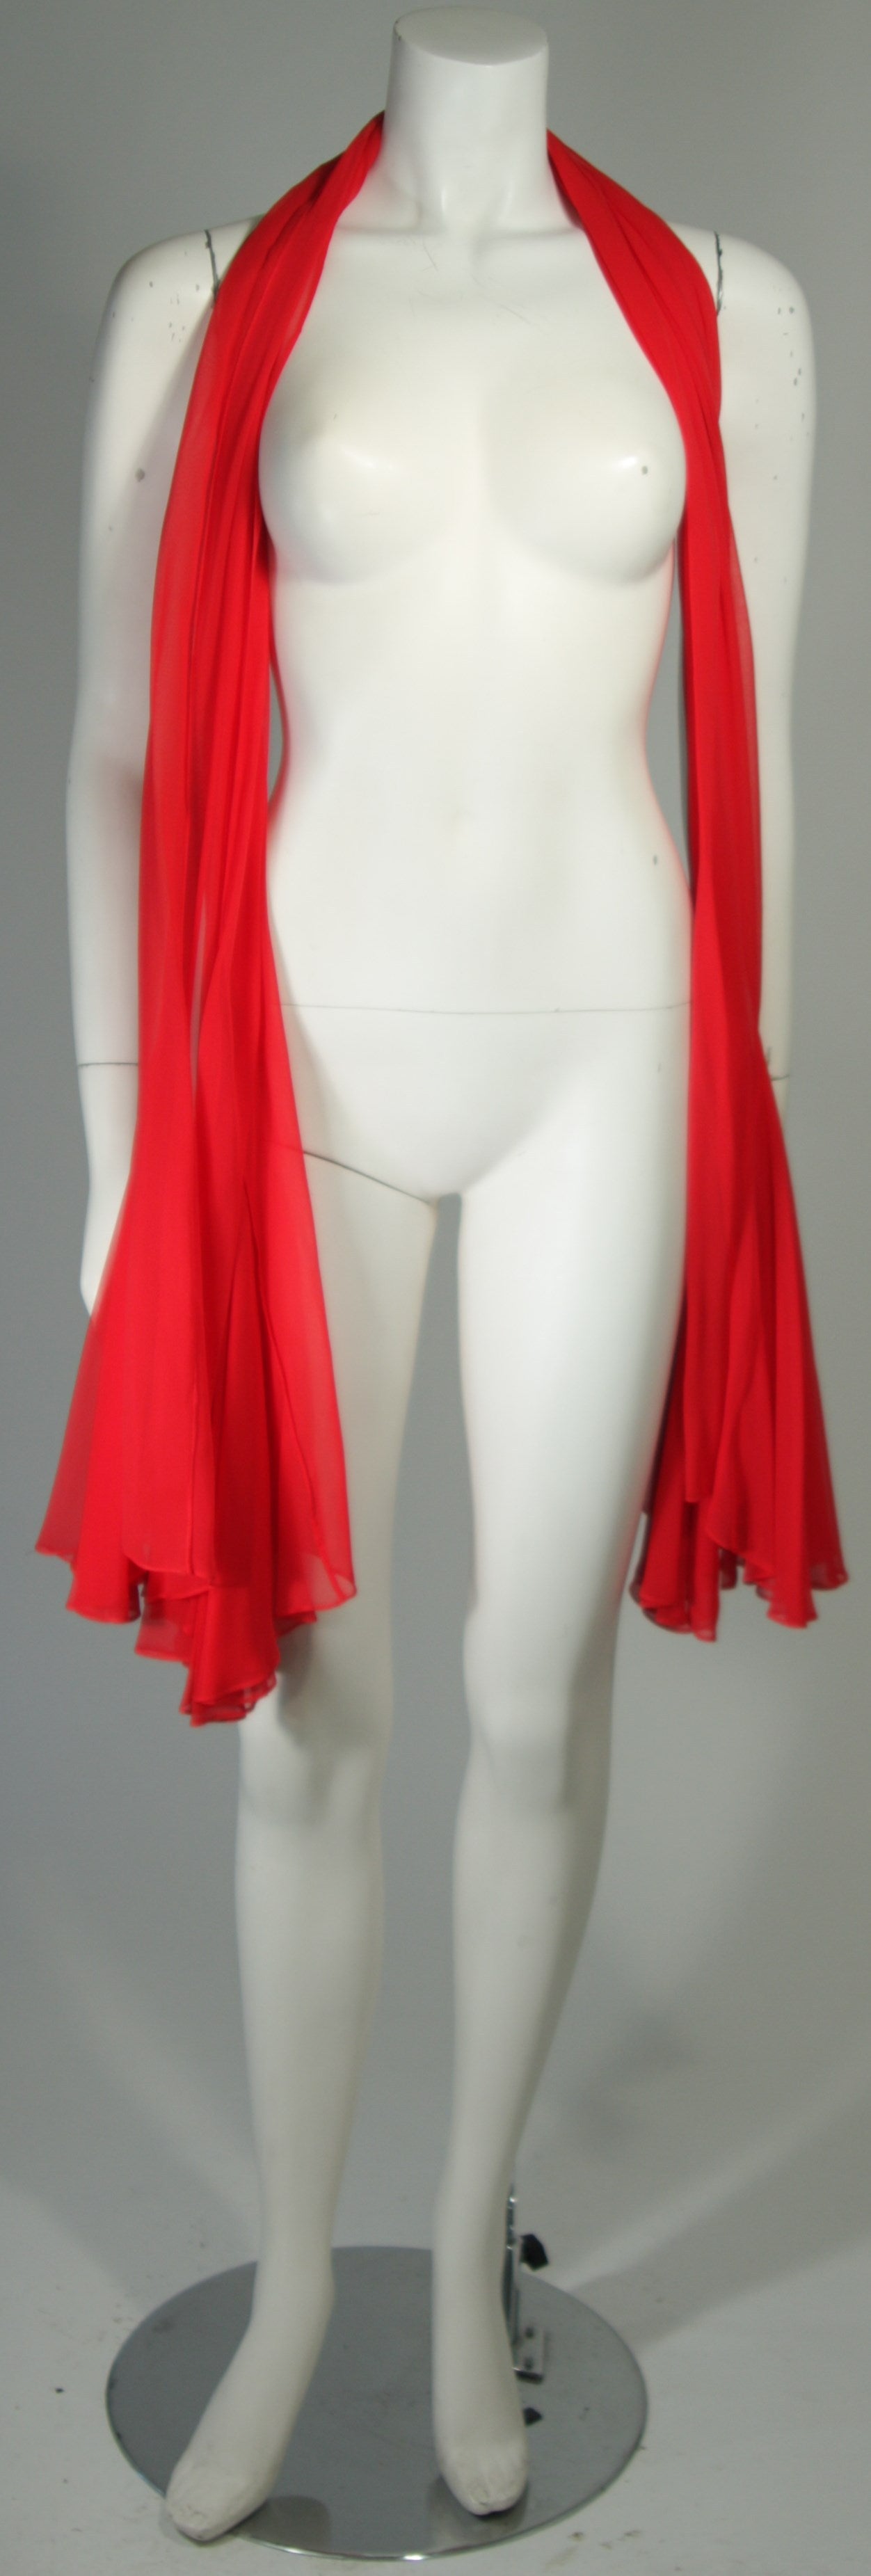 Travilla Red Silk Chiffon Godet Dress with Shawl Size Small Medium In Excellent Condition For Sale In Los Angeles, CA